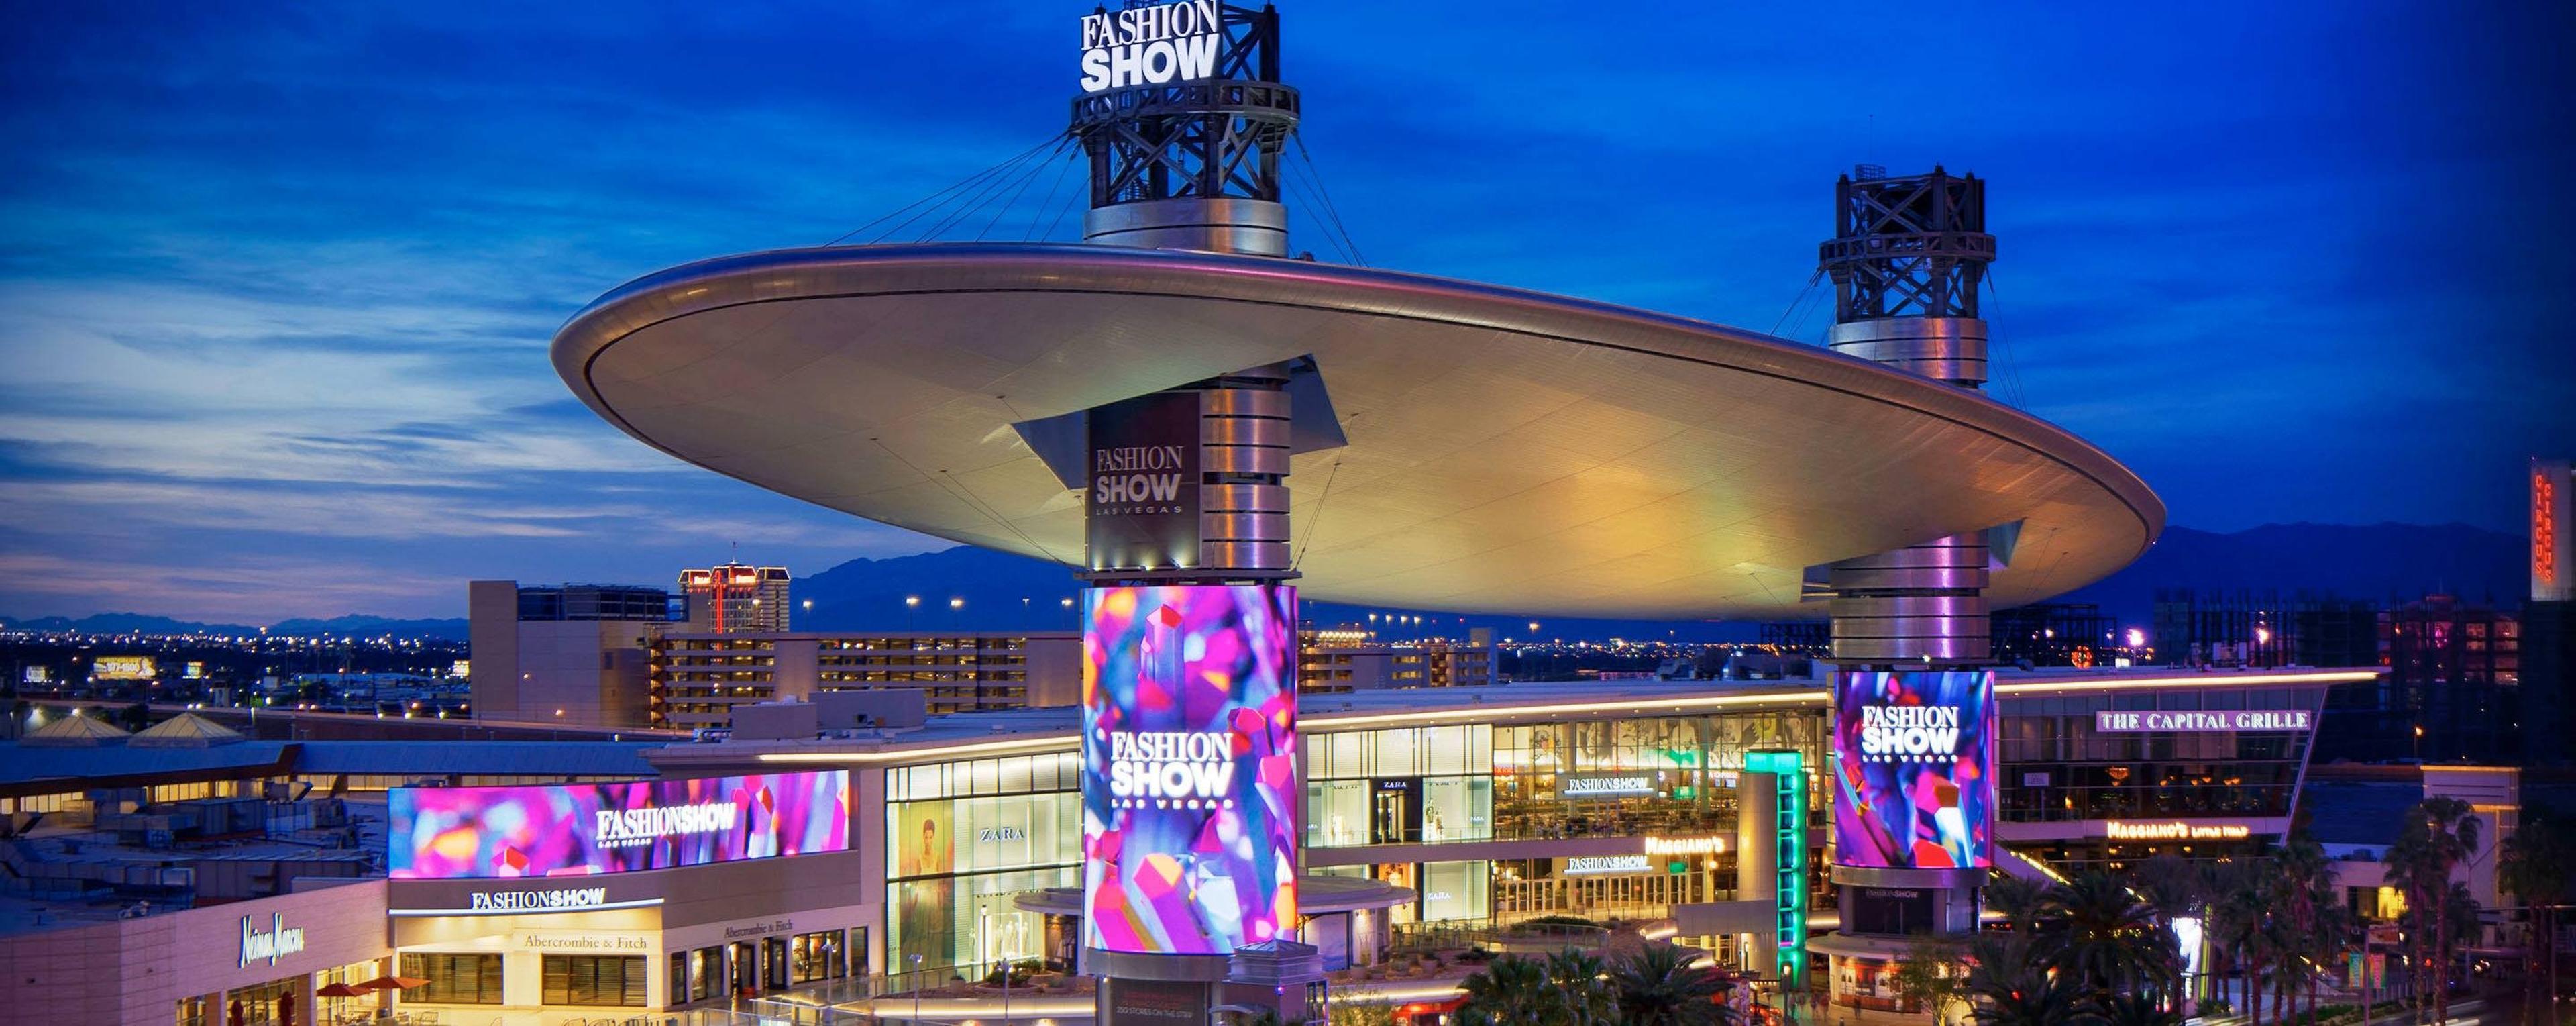 Fashion Show Mall - Event Space in Las Vegas, NV